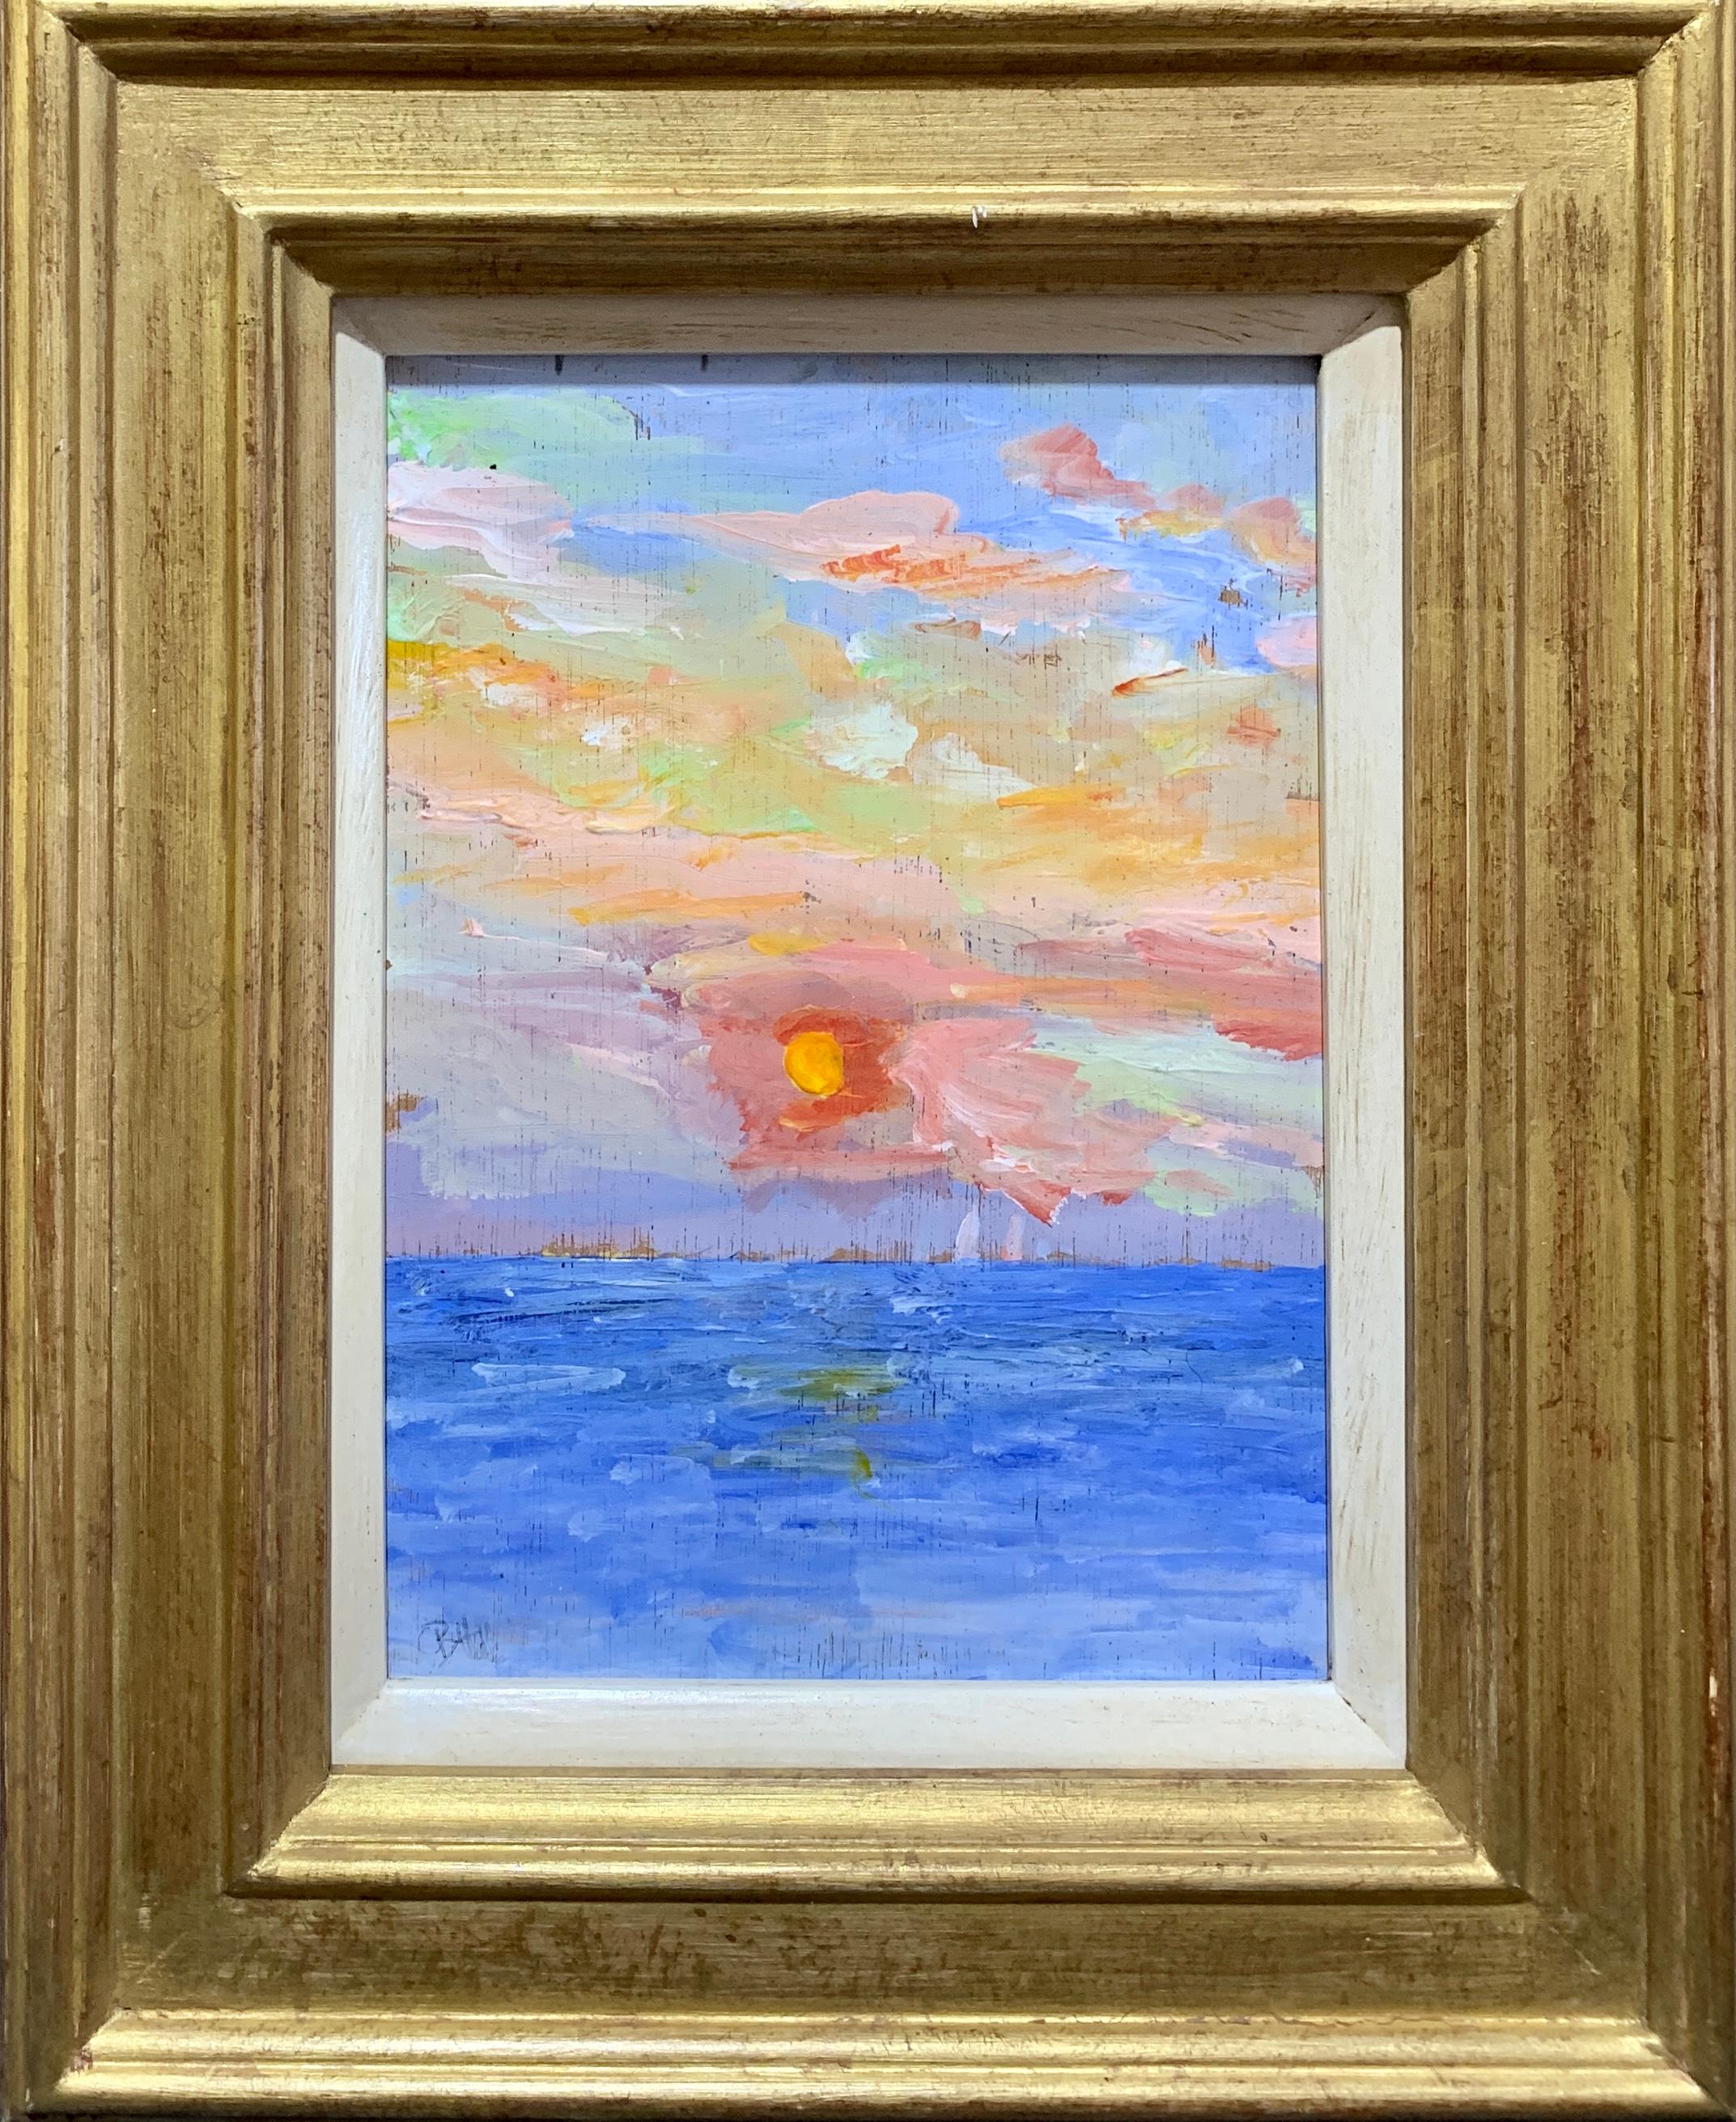 Charles Bertie Hall Figurative Painting - American Impressionist Coastal Sunset from the East Cost of America.